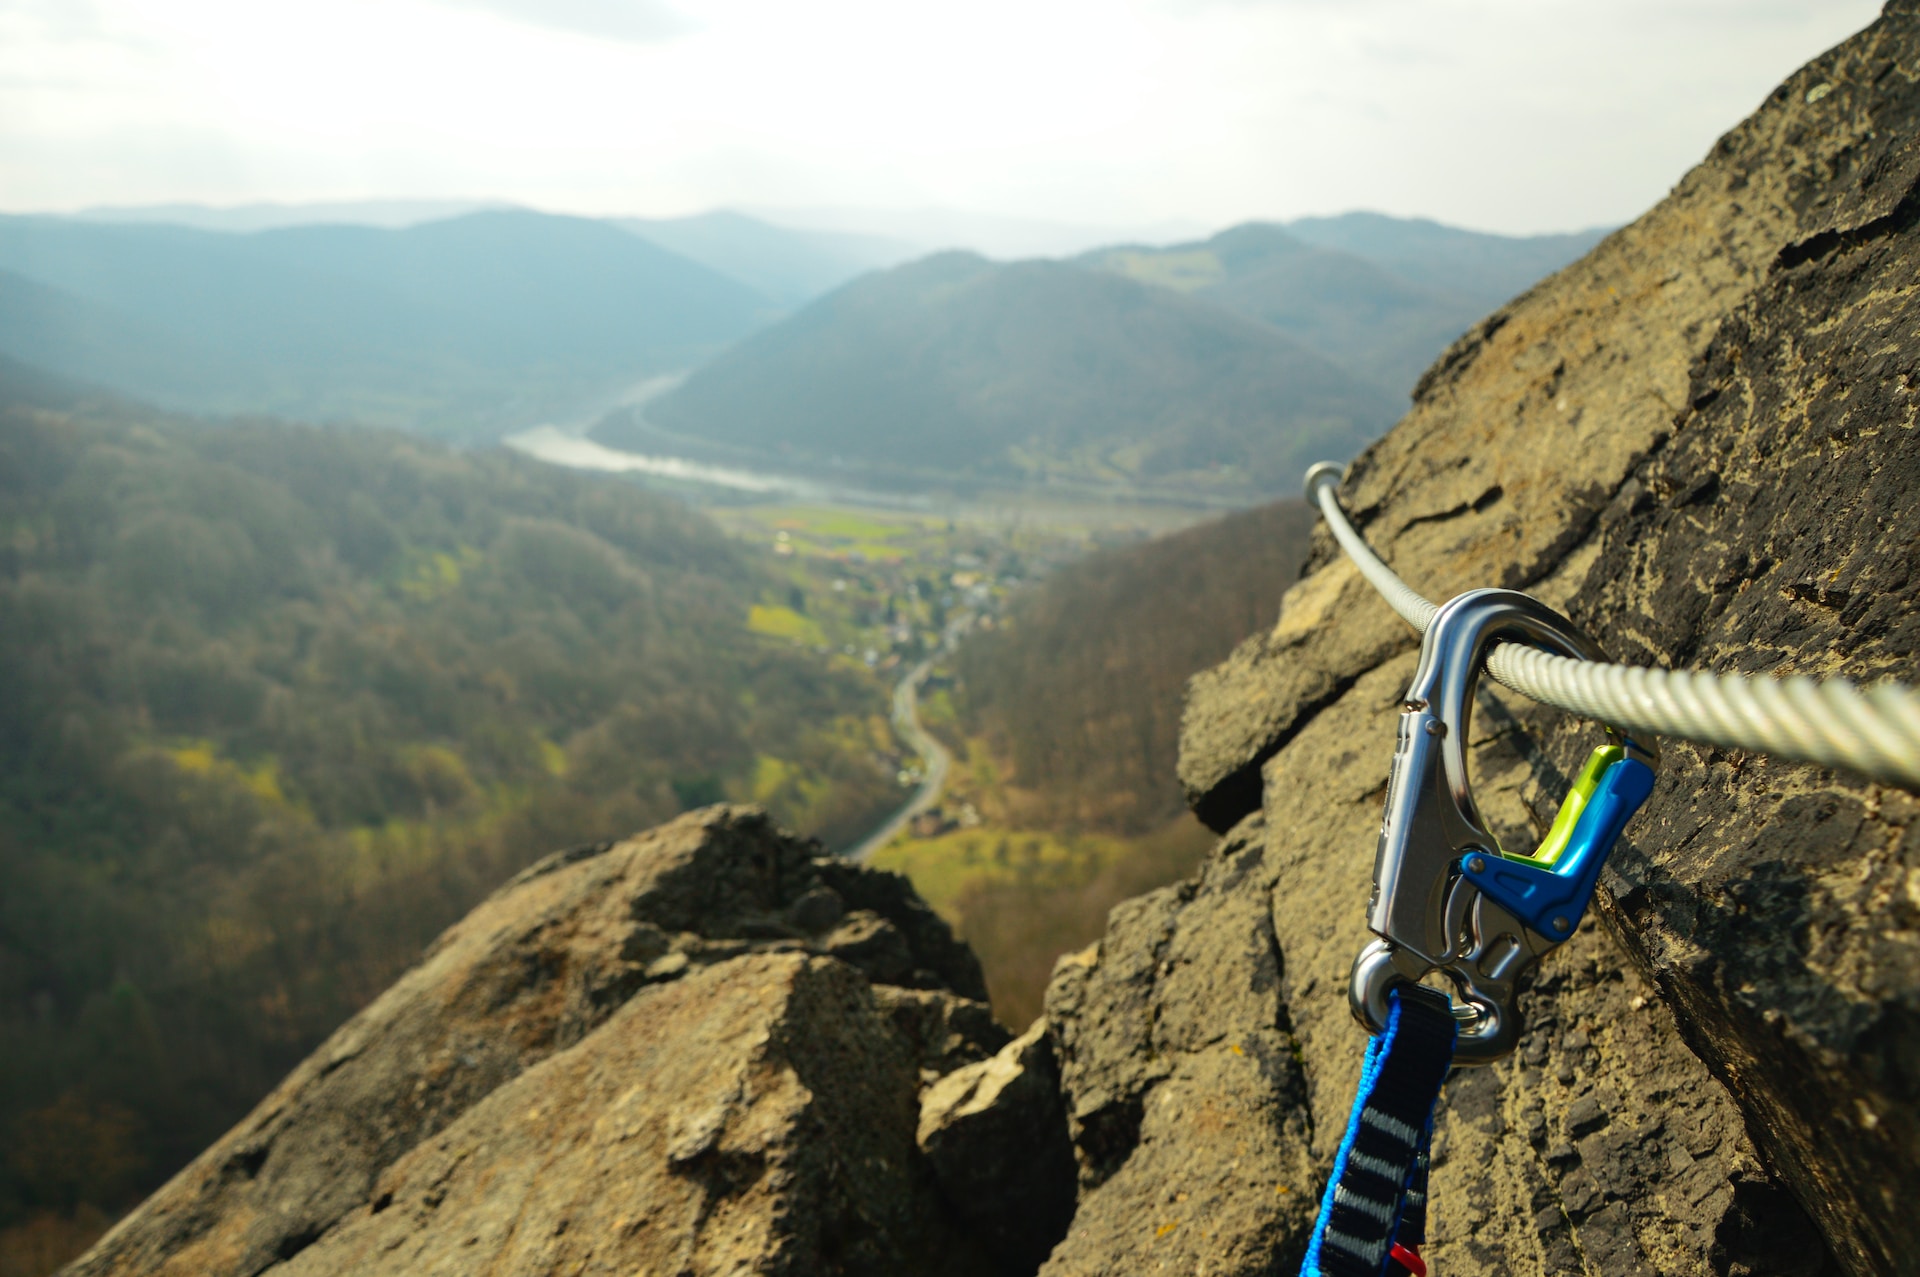 Let's take a look at best via ferrata experiences in the world.